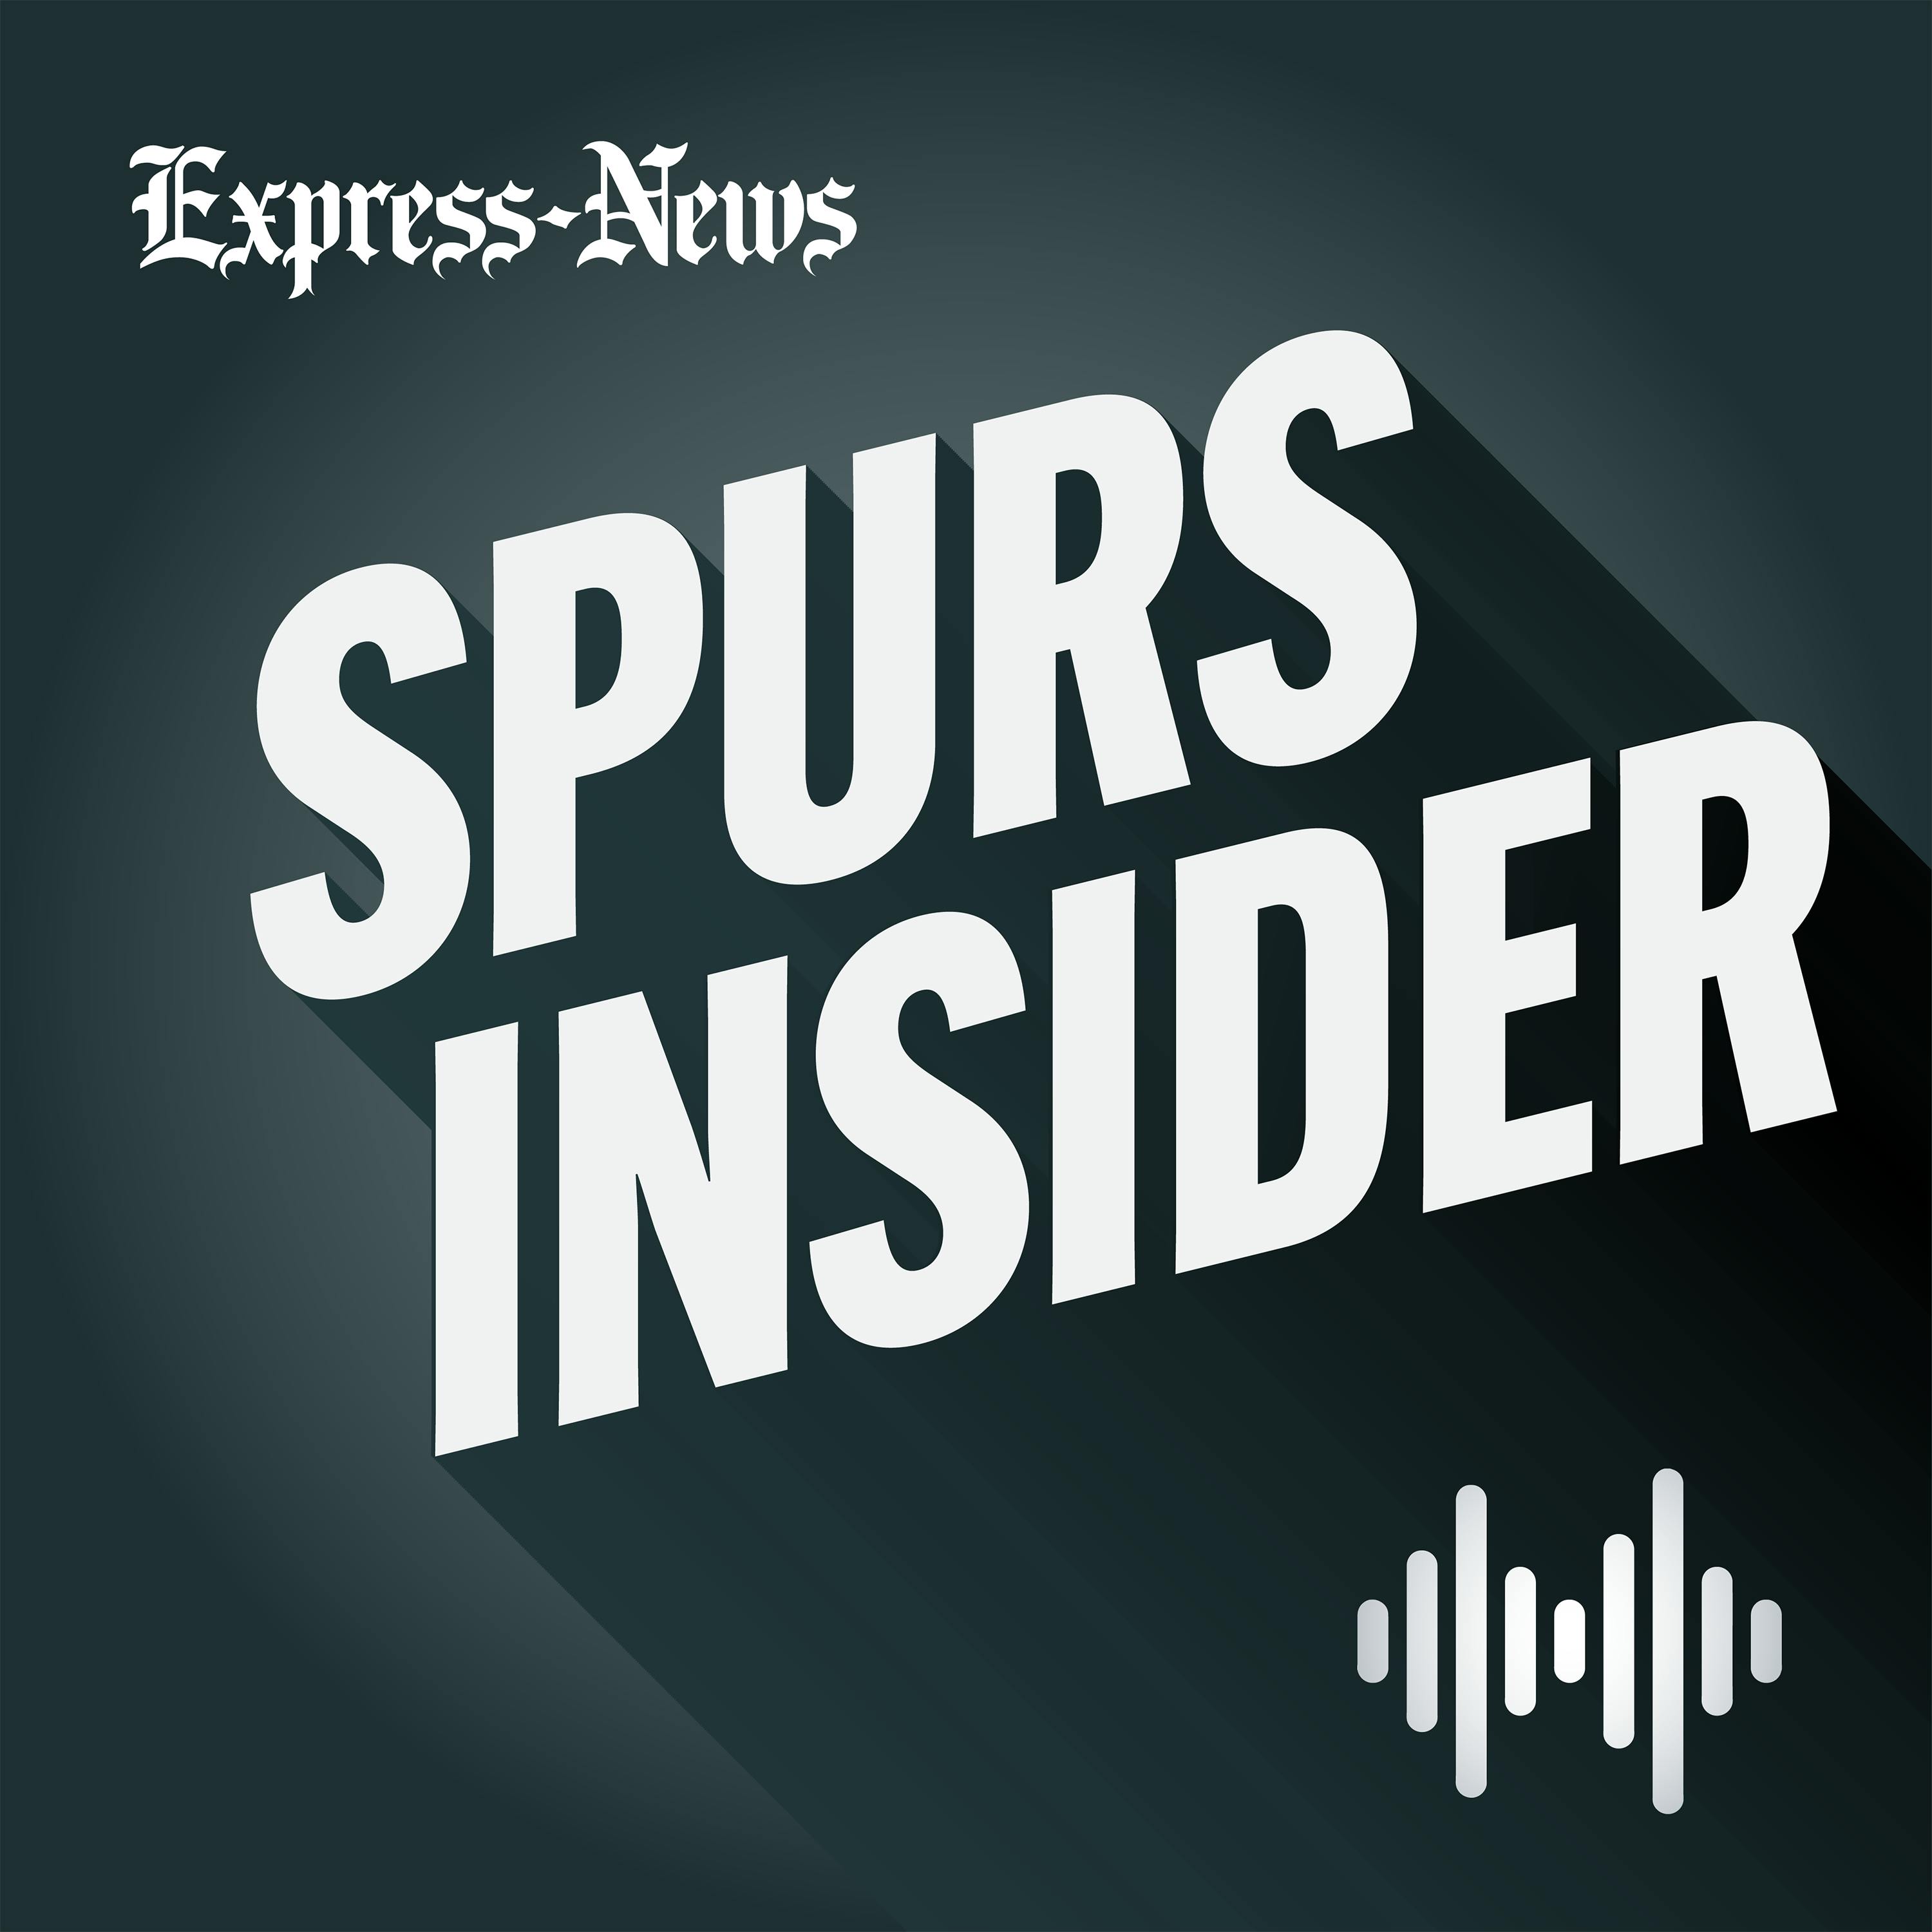 Episode 88: Are there playoff hopes for the Spurs in 2021?